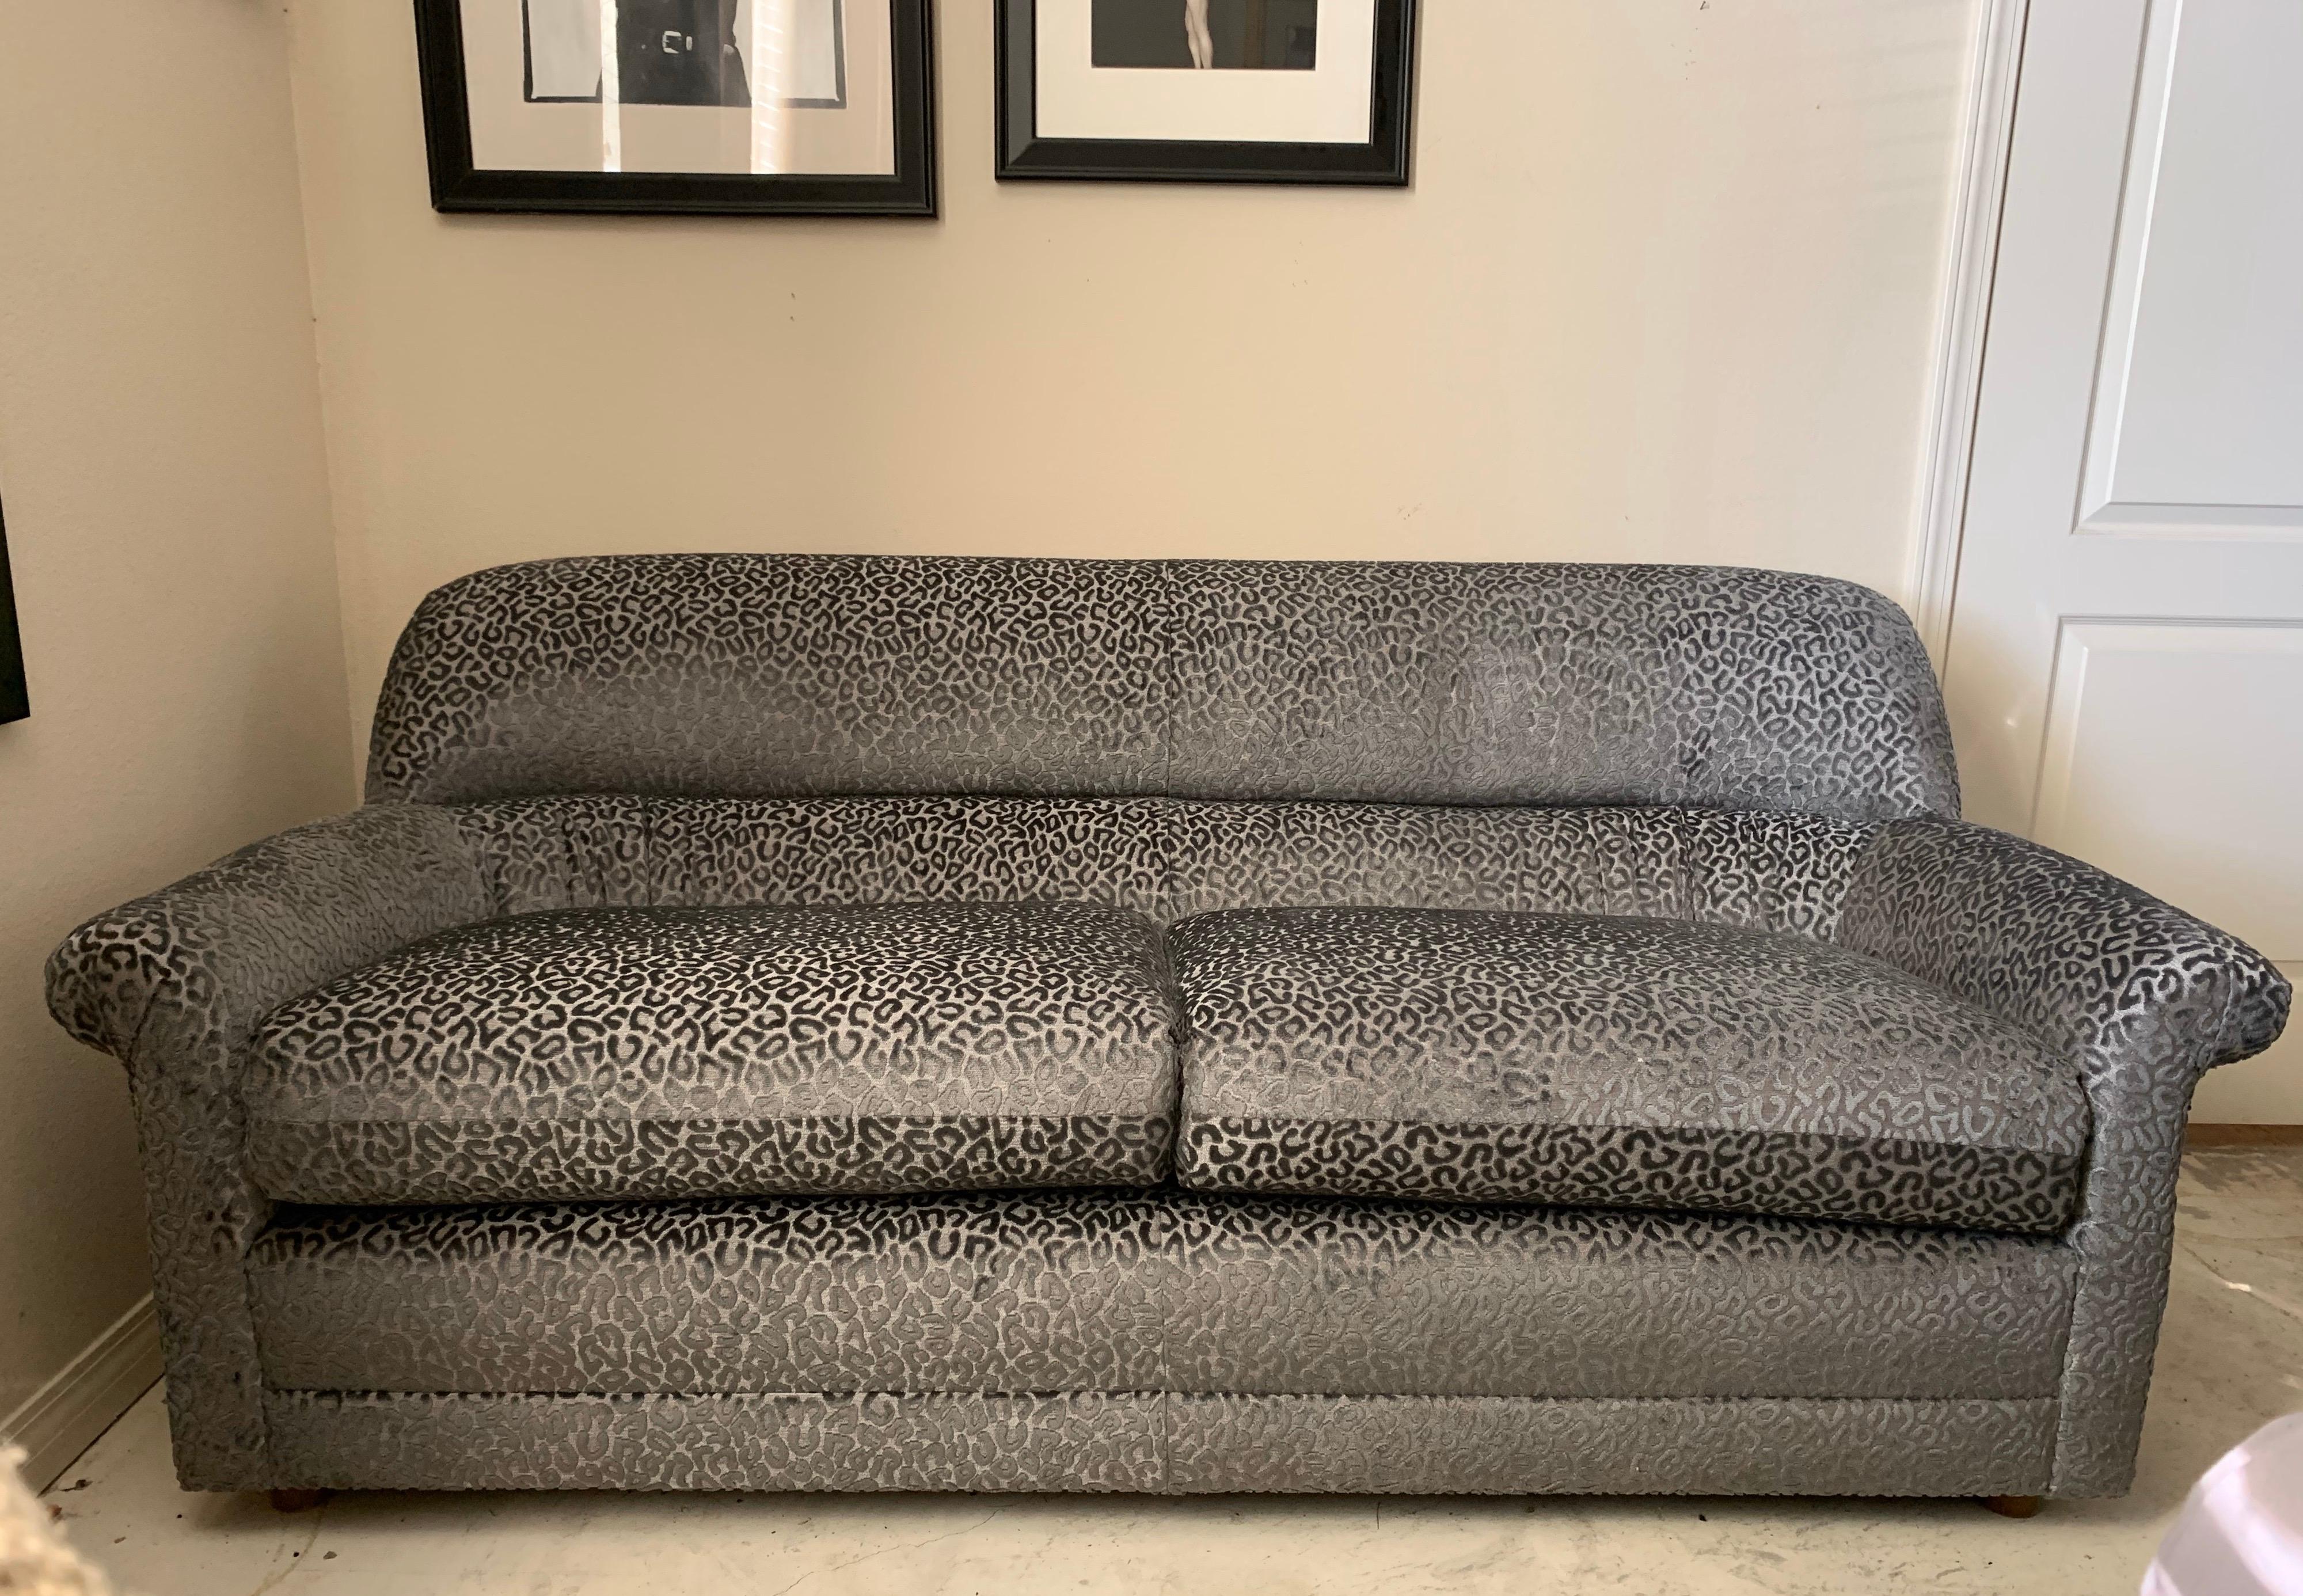 Hand-Crafted Modern 80s Sculptural Sofa in New Silver Grey Metallic Leopard Jacquard Fabric For Sale